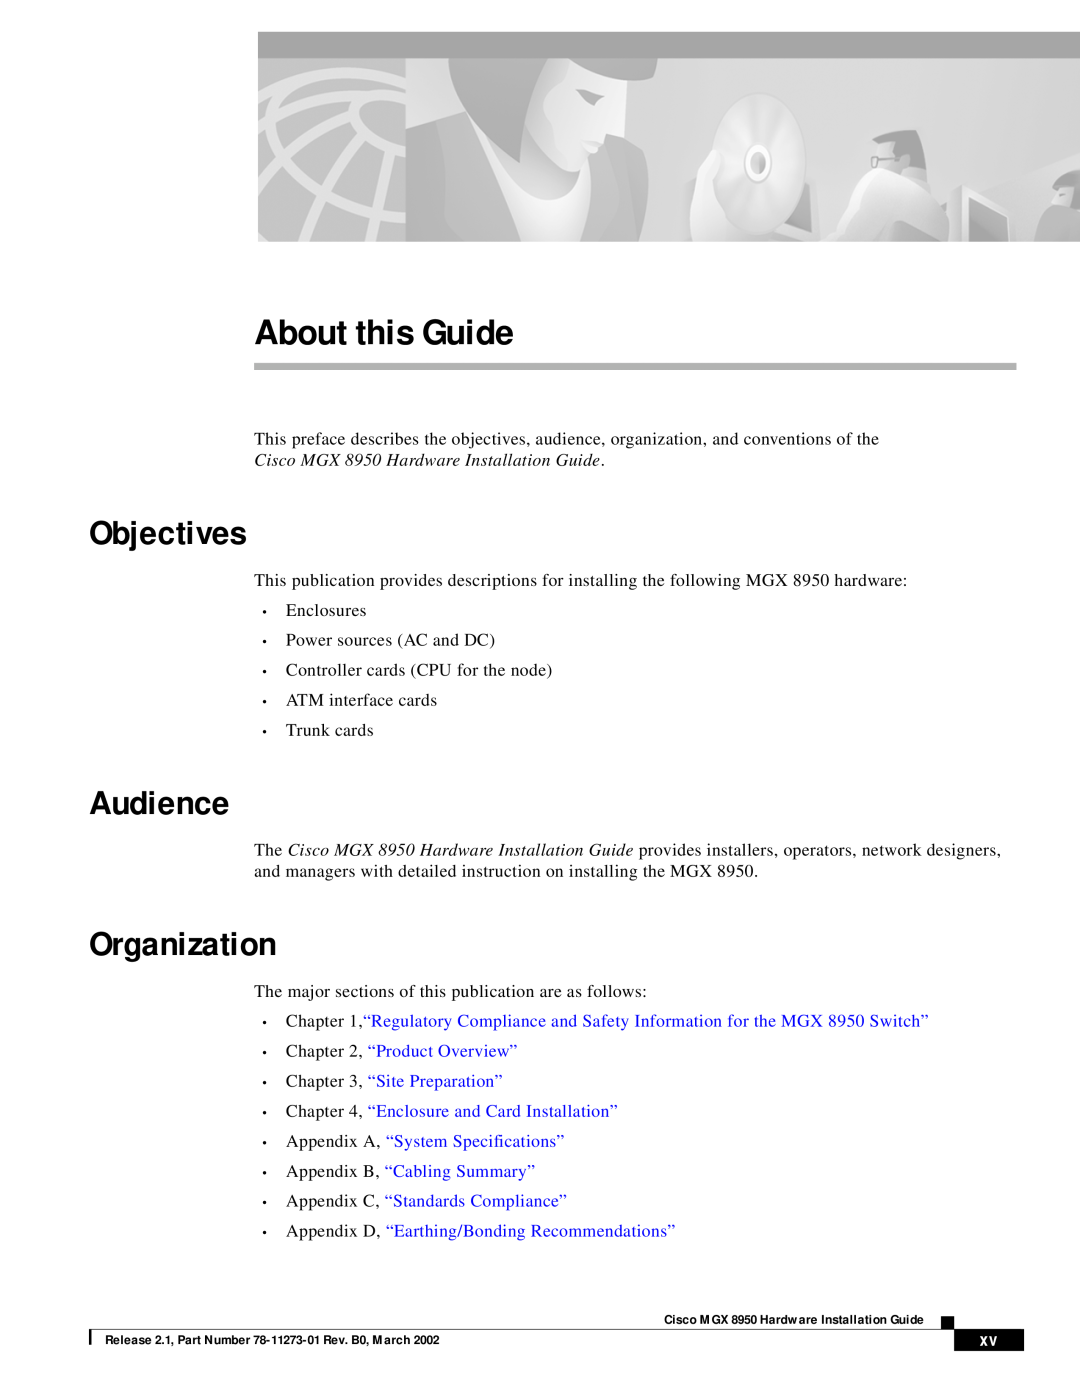 Cisco Systems MGX 8950 appendix Objectives, Audience, Organization, About this Guide 